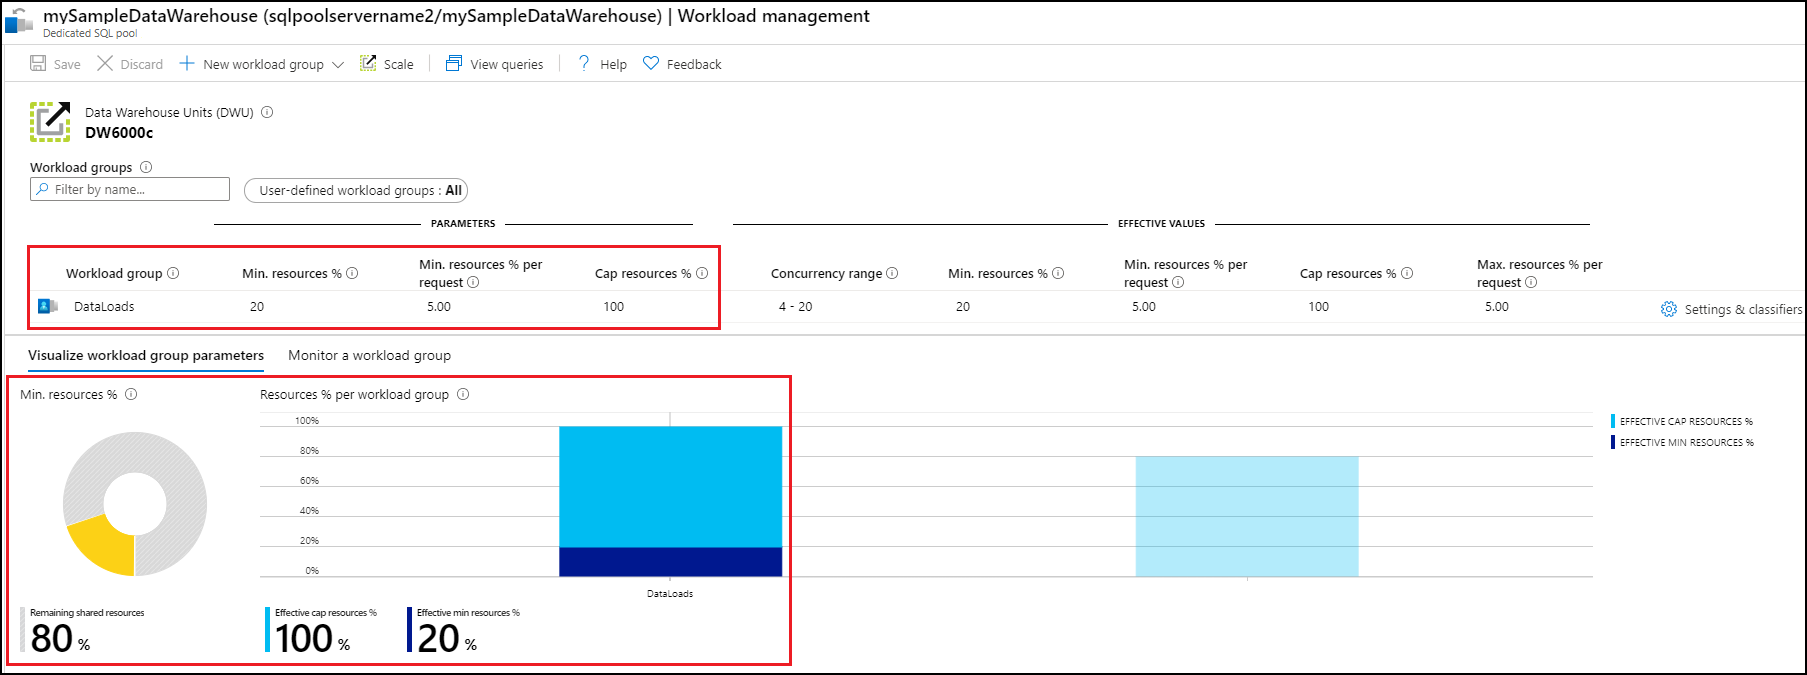 A screenshot of the Azure portal, showing visualizations for workload group parameters.